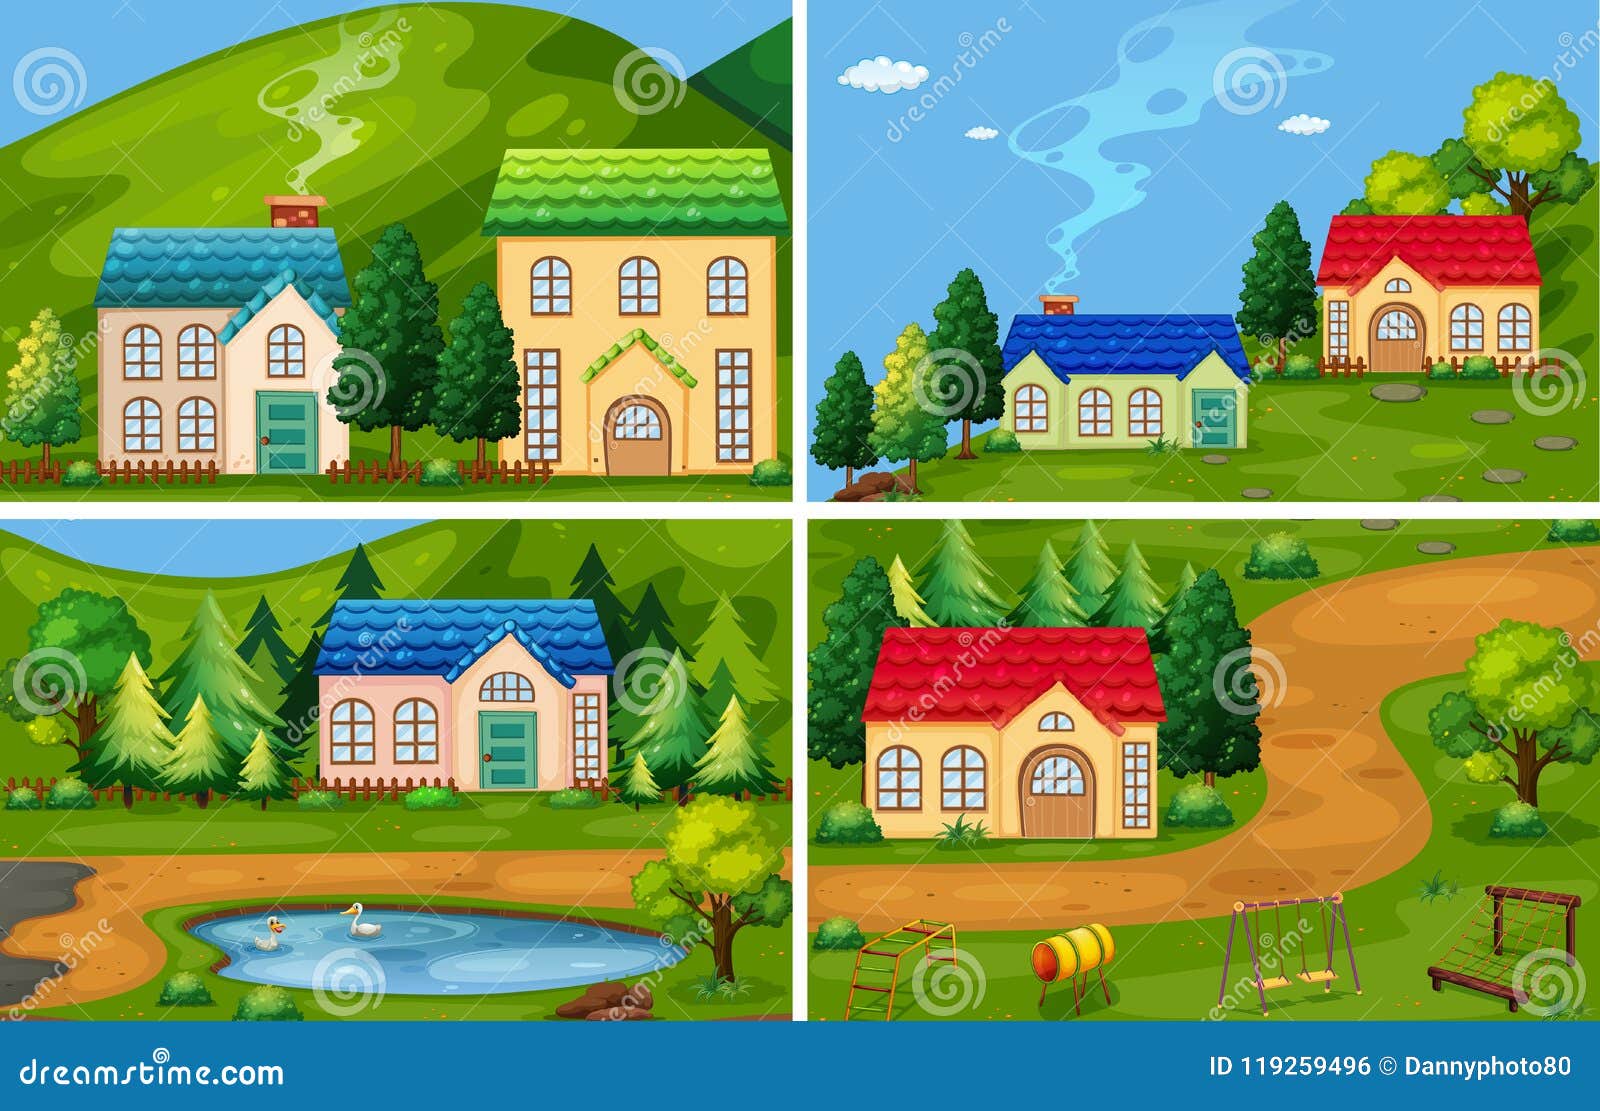 A Set of Forest House stock vector. Illustration of scene - 119259496